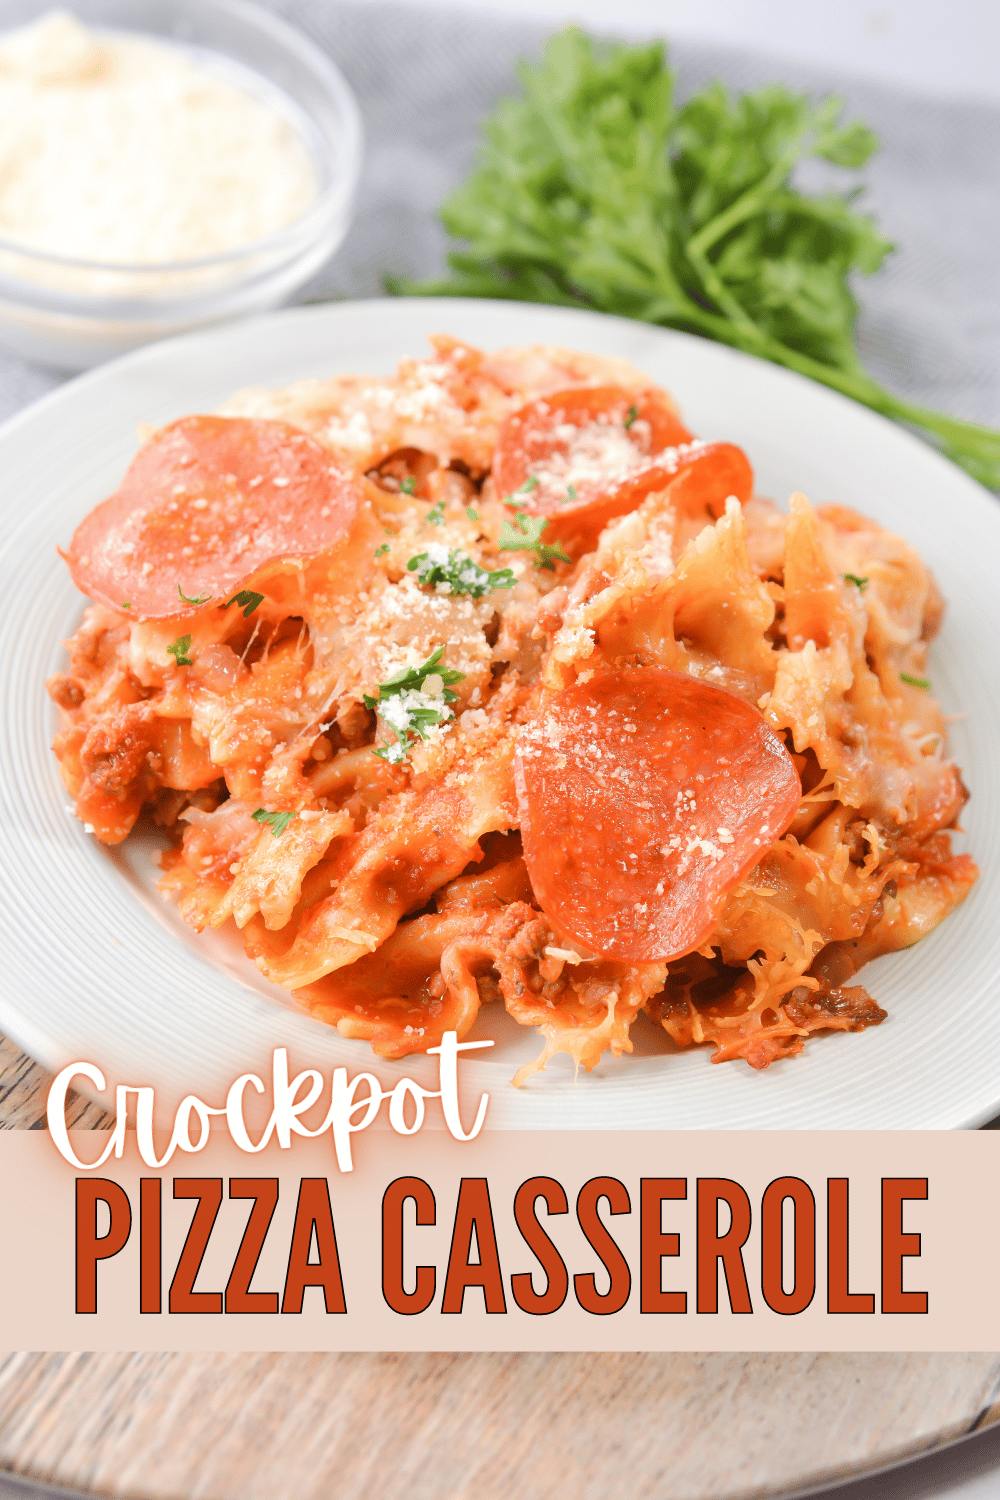 This Crockpot Pizza Casserole is an easy and delicious way to enjoy pizza for dinner! You can never go wrong with this dish. #crockpotpizzacasserole #pizzacasserole #slowcooker #recipe #pizza via @wondermomwannab